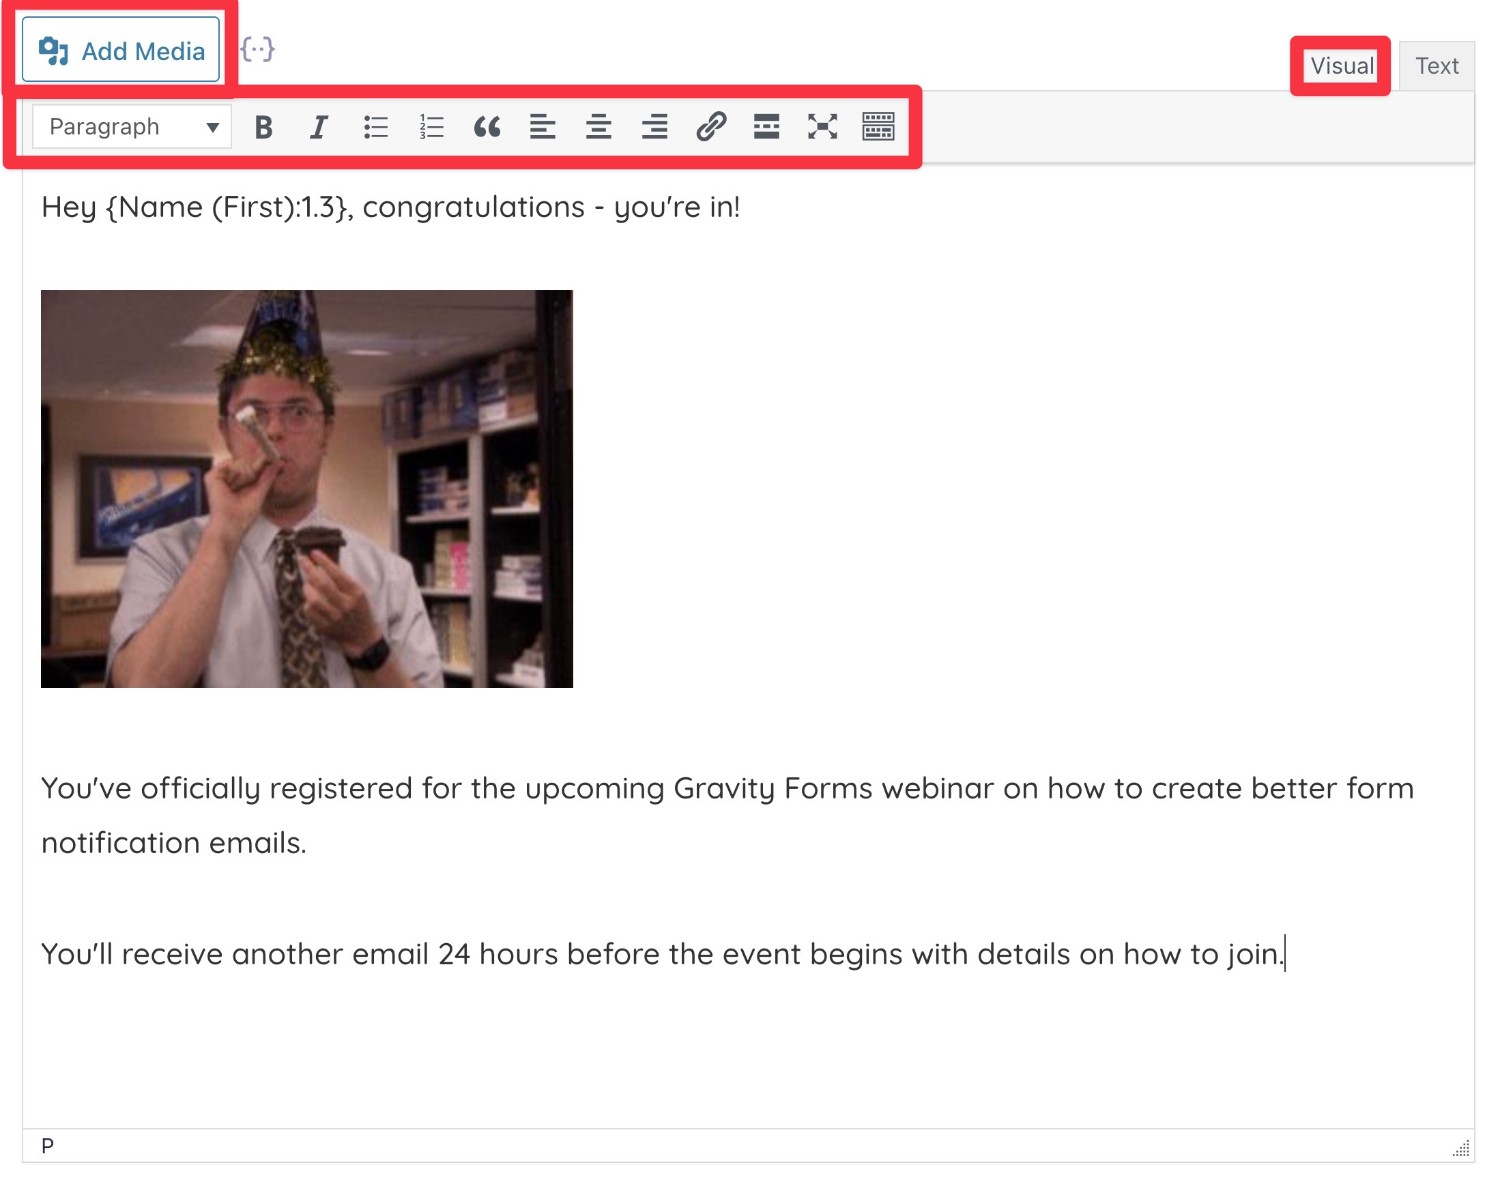 How to add formatting and images to emails using the Visual editor